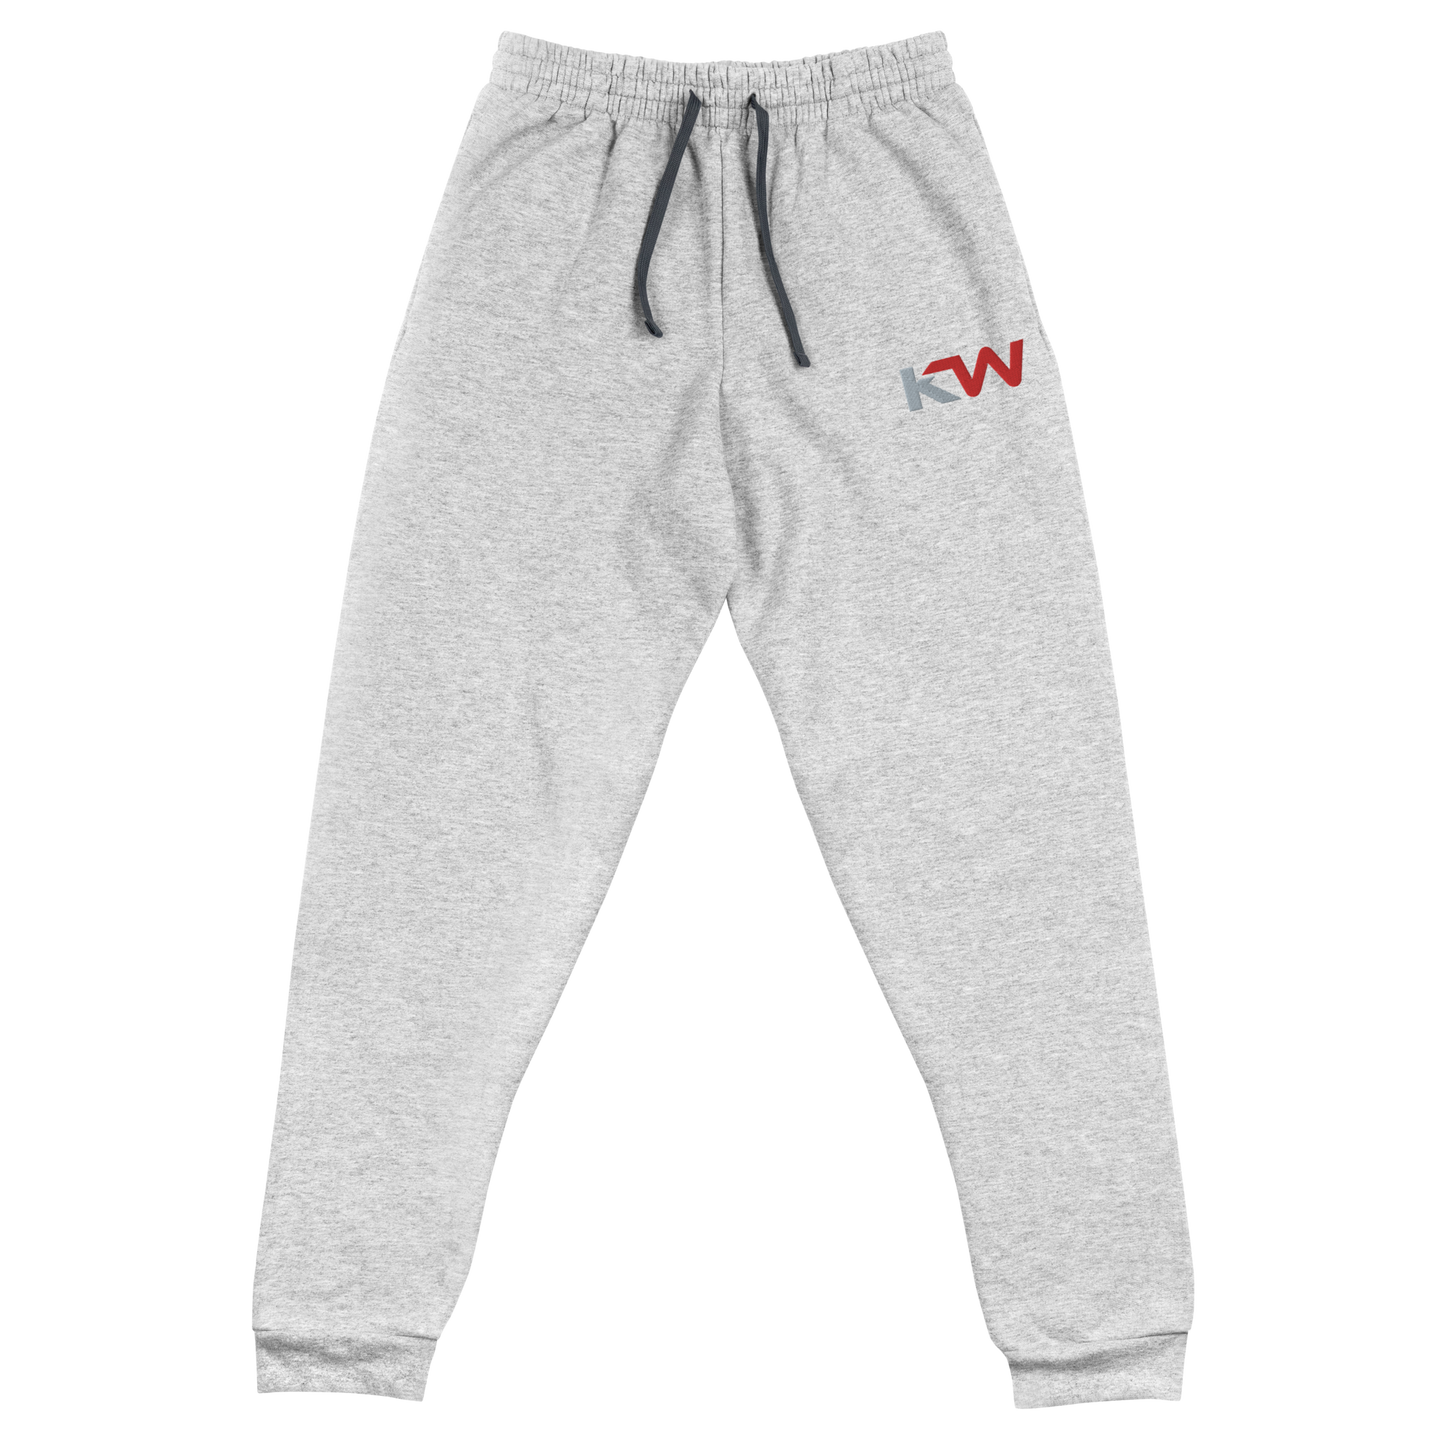 KENDALL WILLIAMS JOGGERS